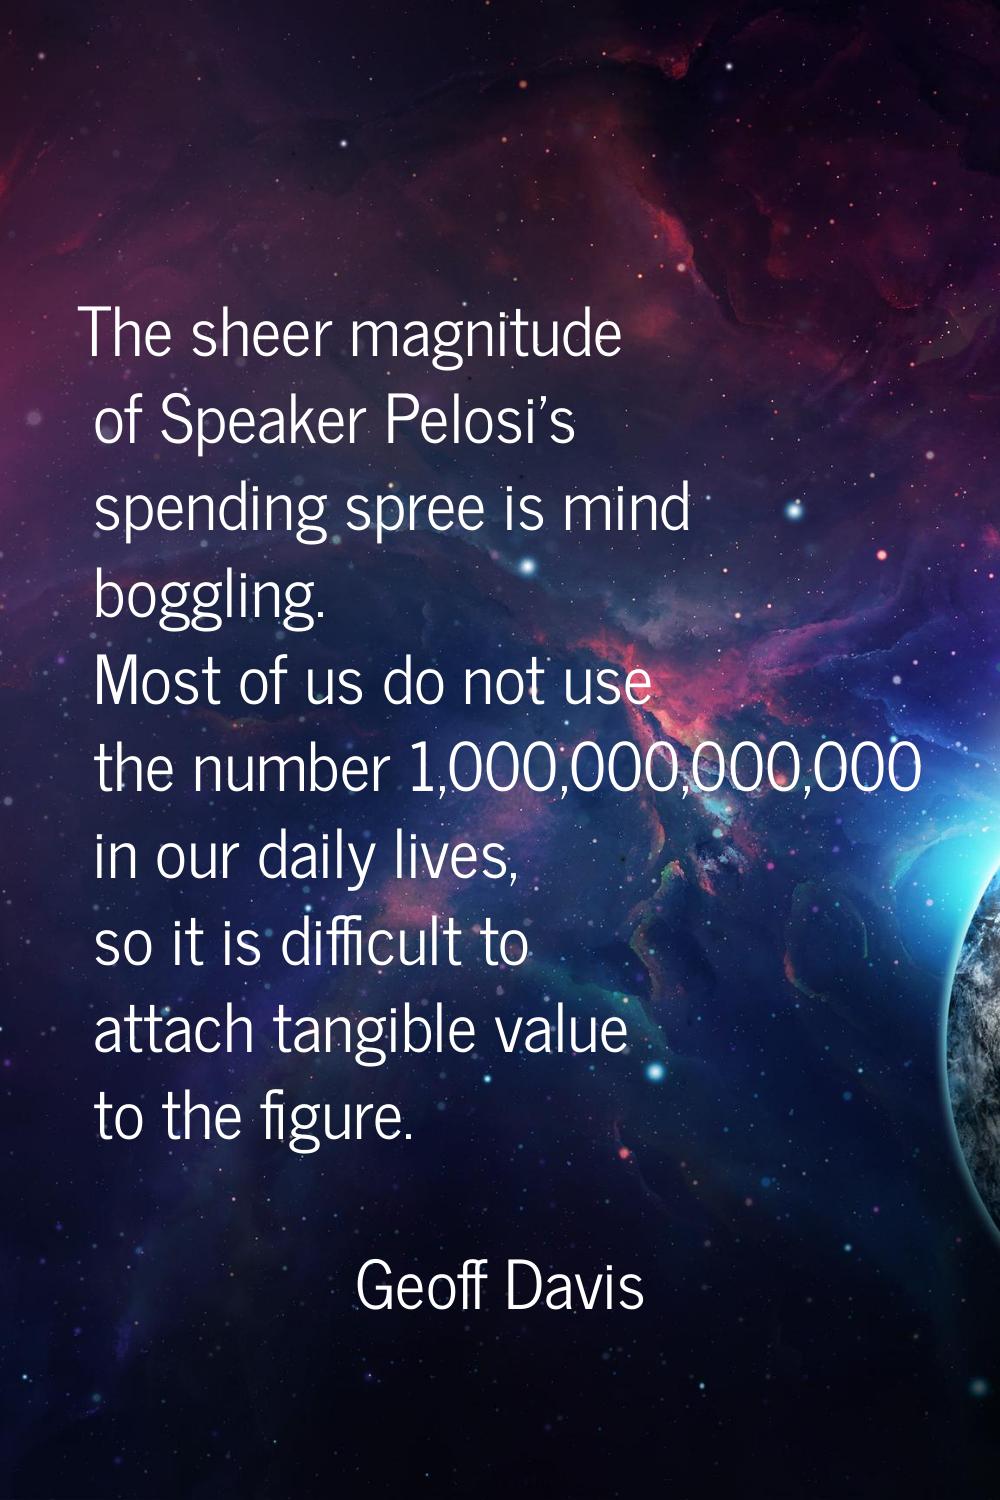 The sheer magnitude of Speaker Pelosi's spending spree is mind boggling. Most of us do not use the 